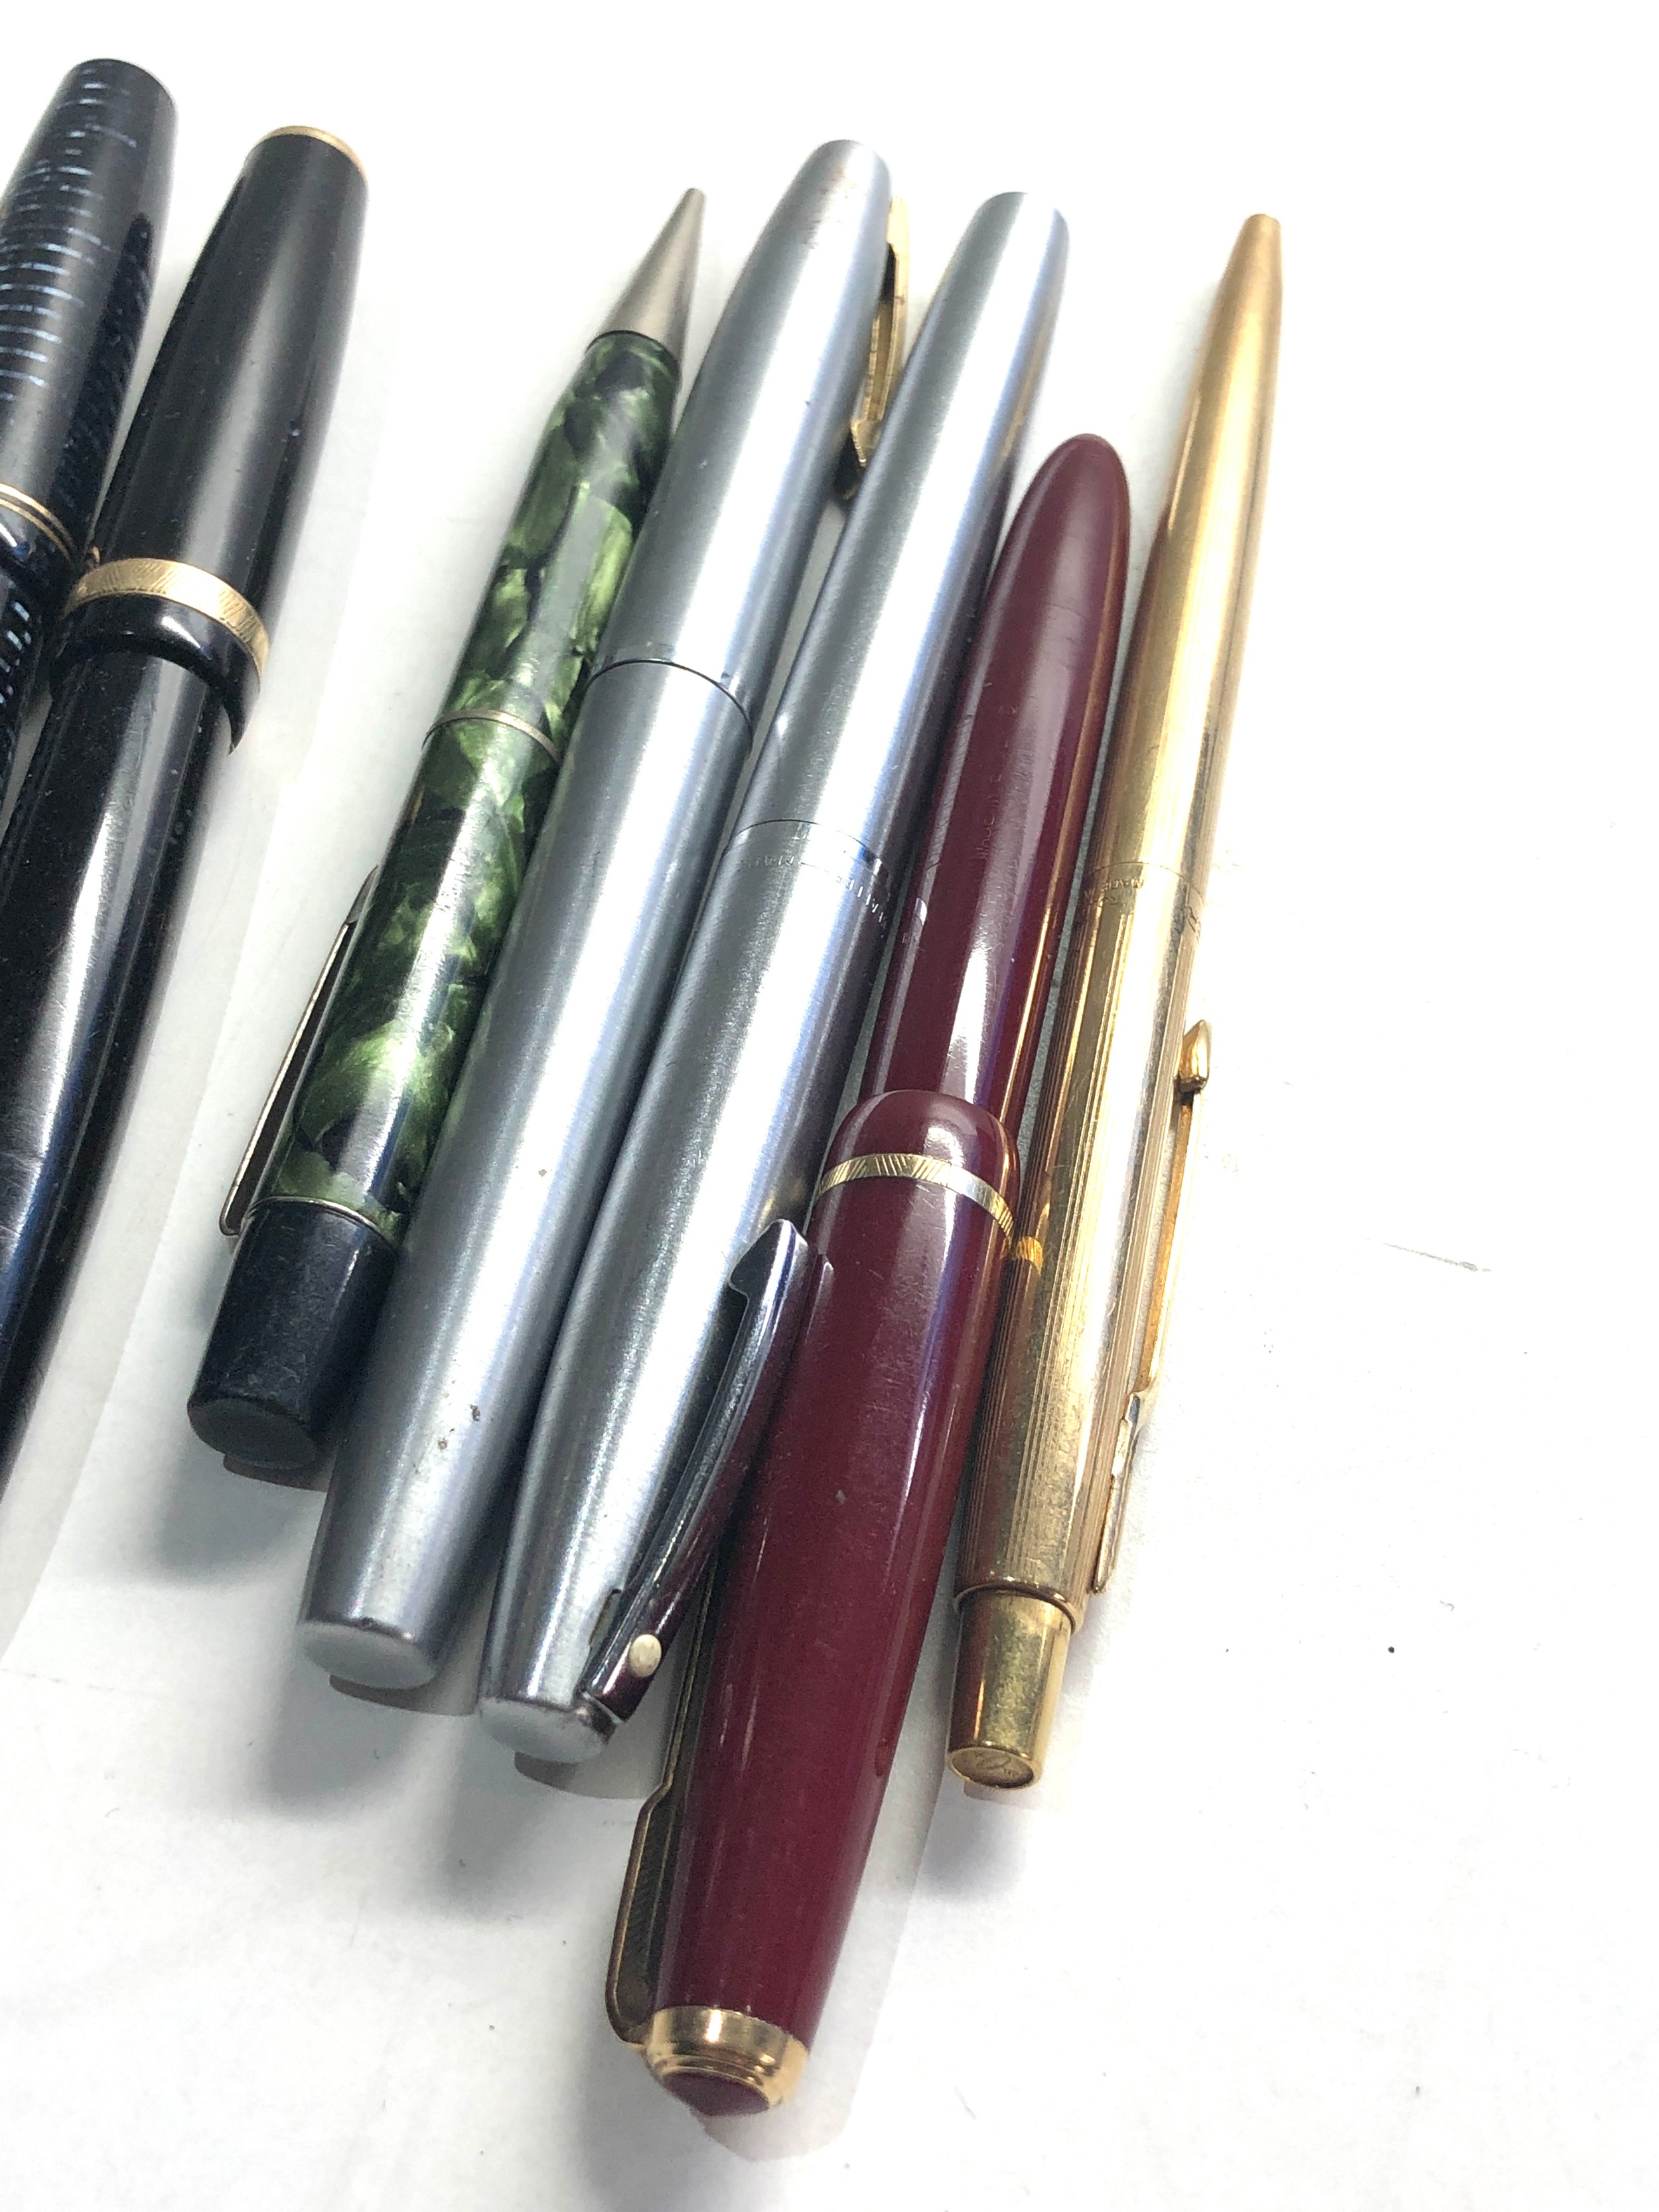 Selection of Vintage fountain pens includes 14ct gold nib parkers sheaffer wyvern etc - Image 3 of 5